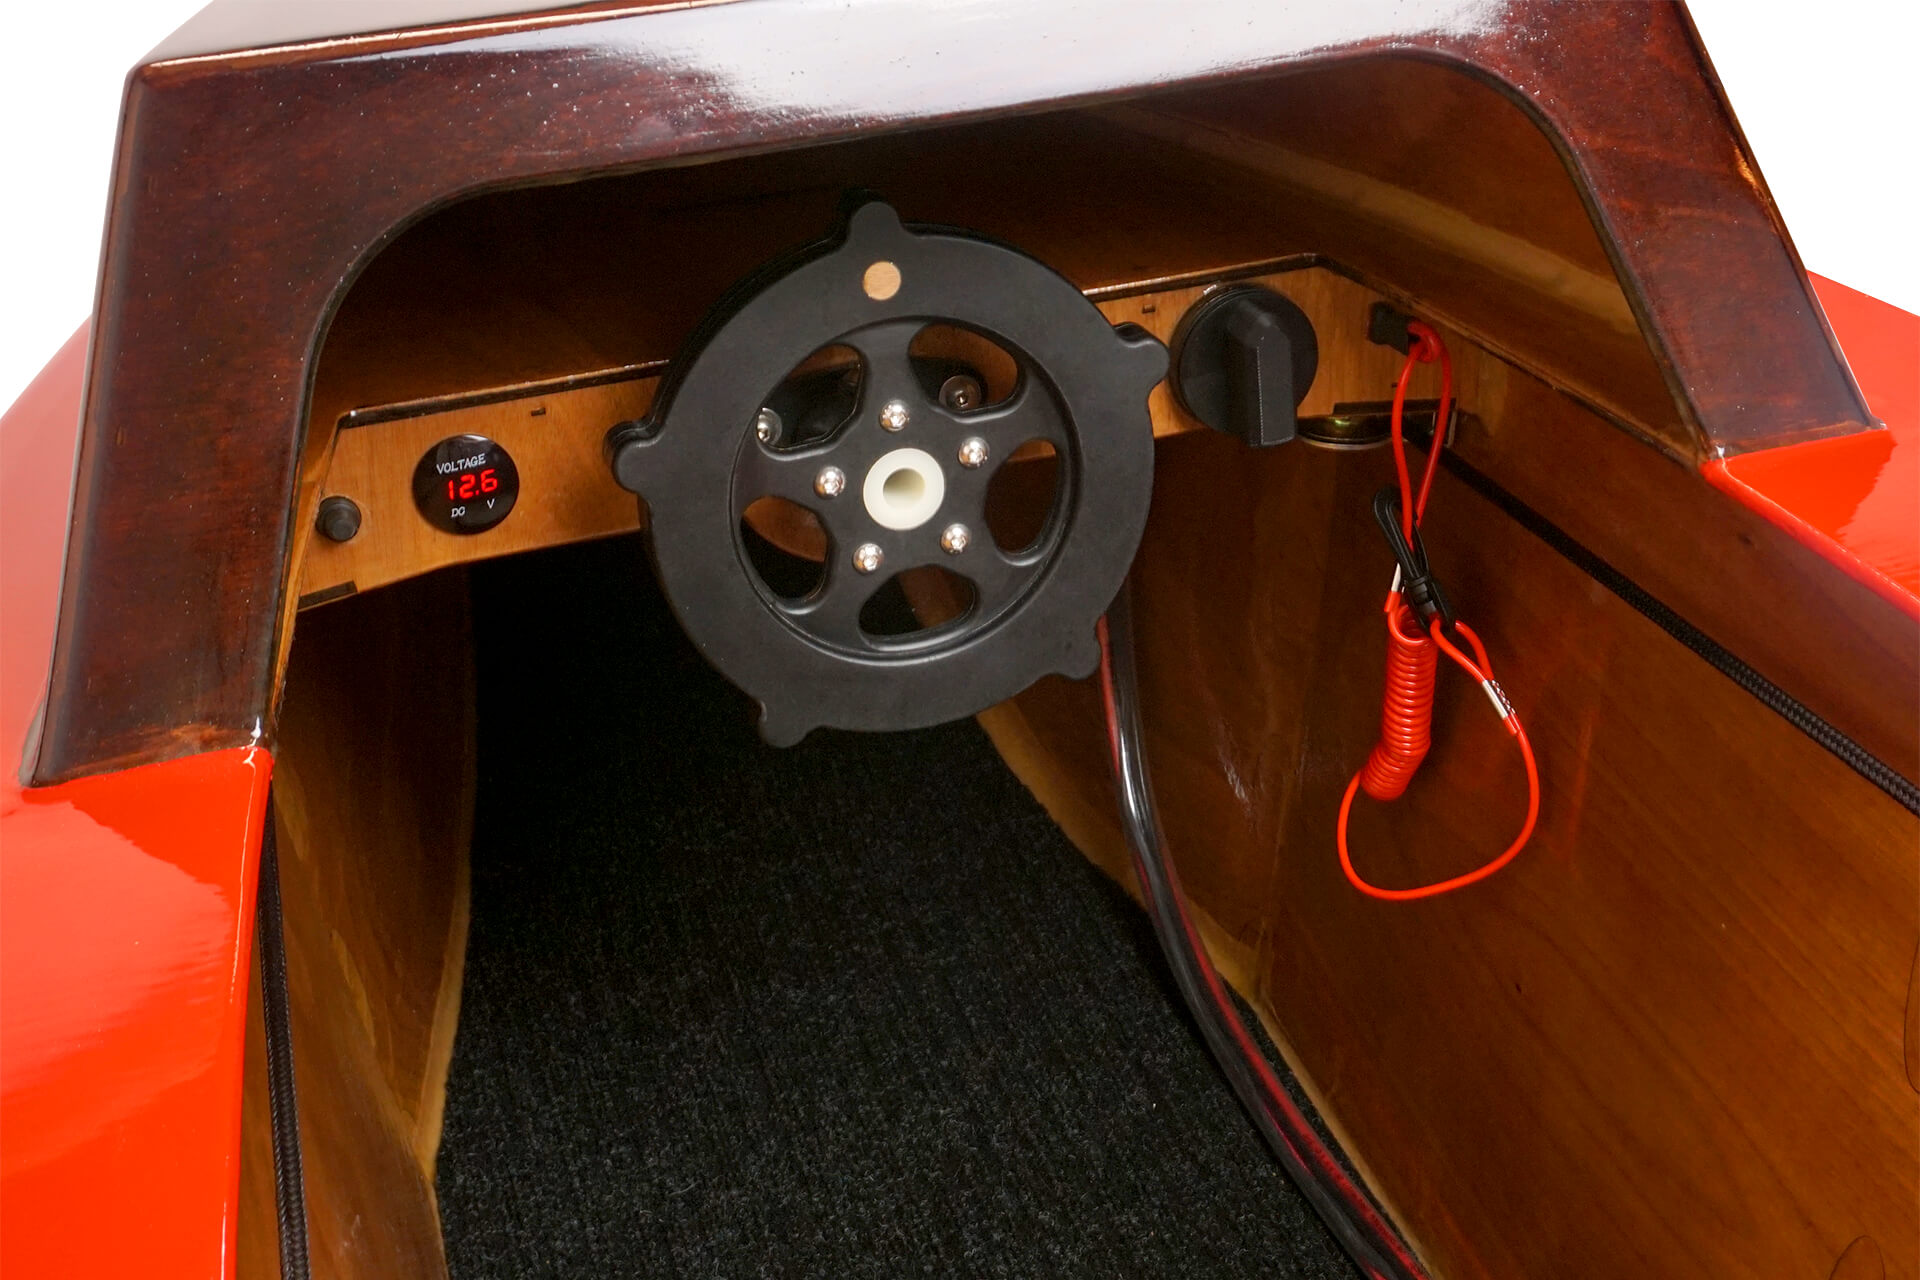 A dashboard view of the mini electric boat, showing off the steering wheel, volt-meter, and dead-mans switch